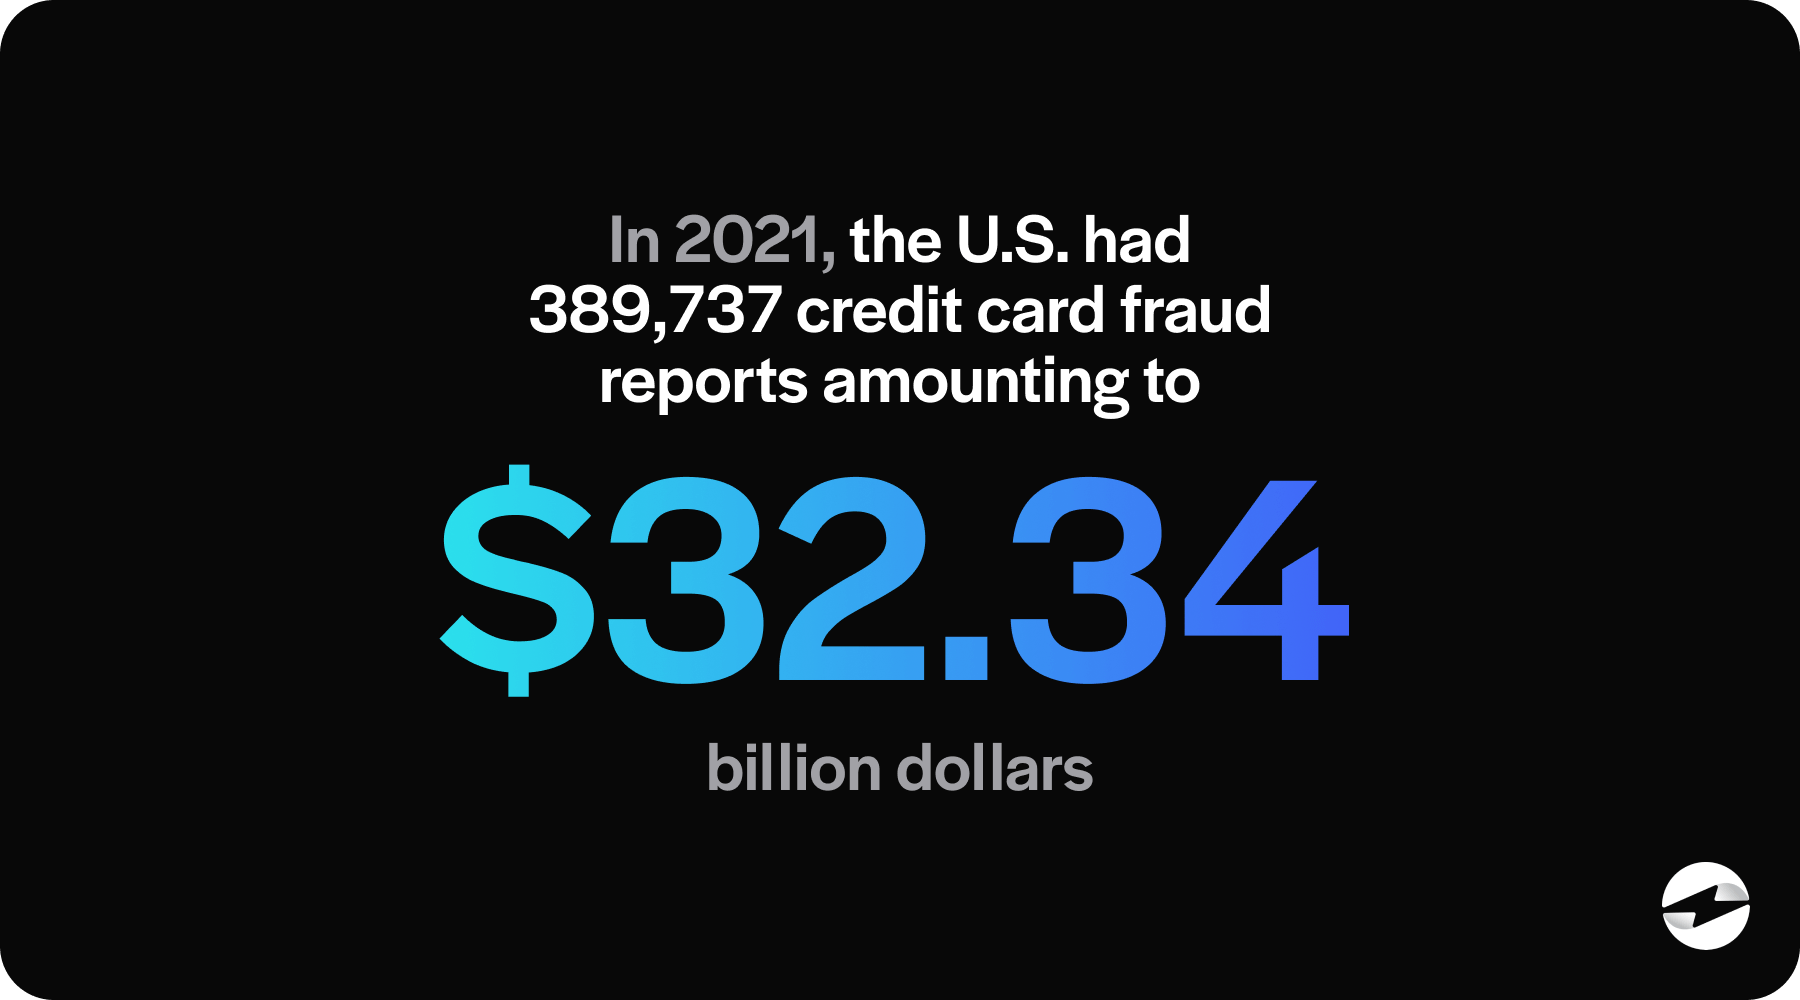 finical loss from credit card fraud